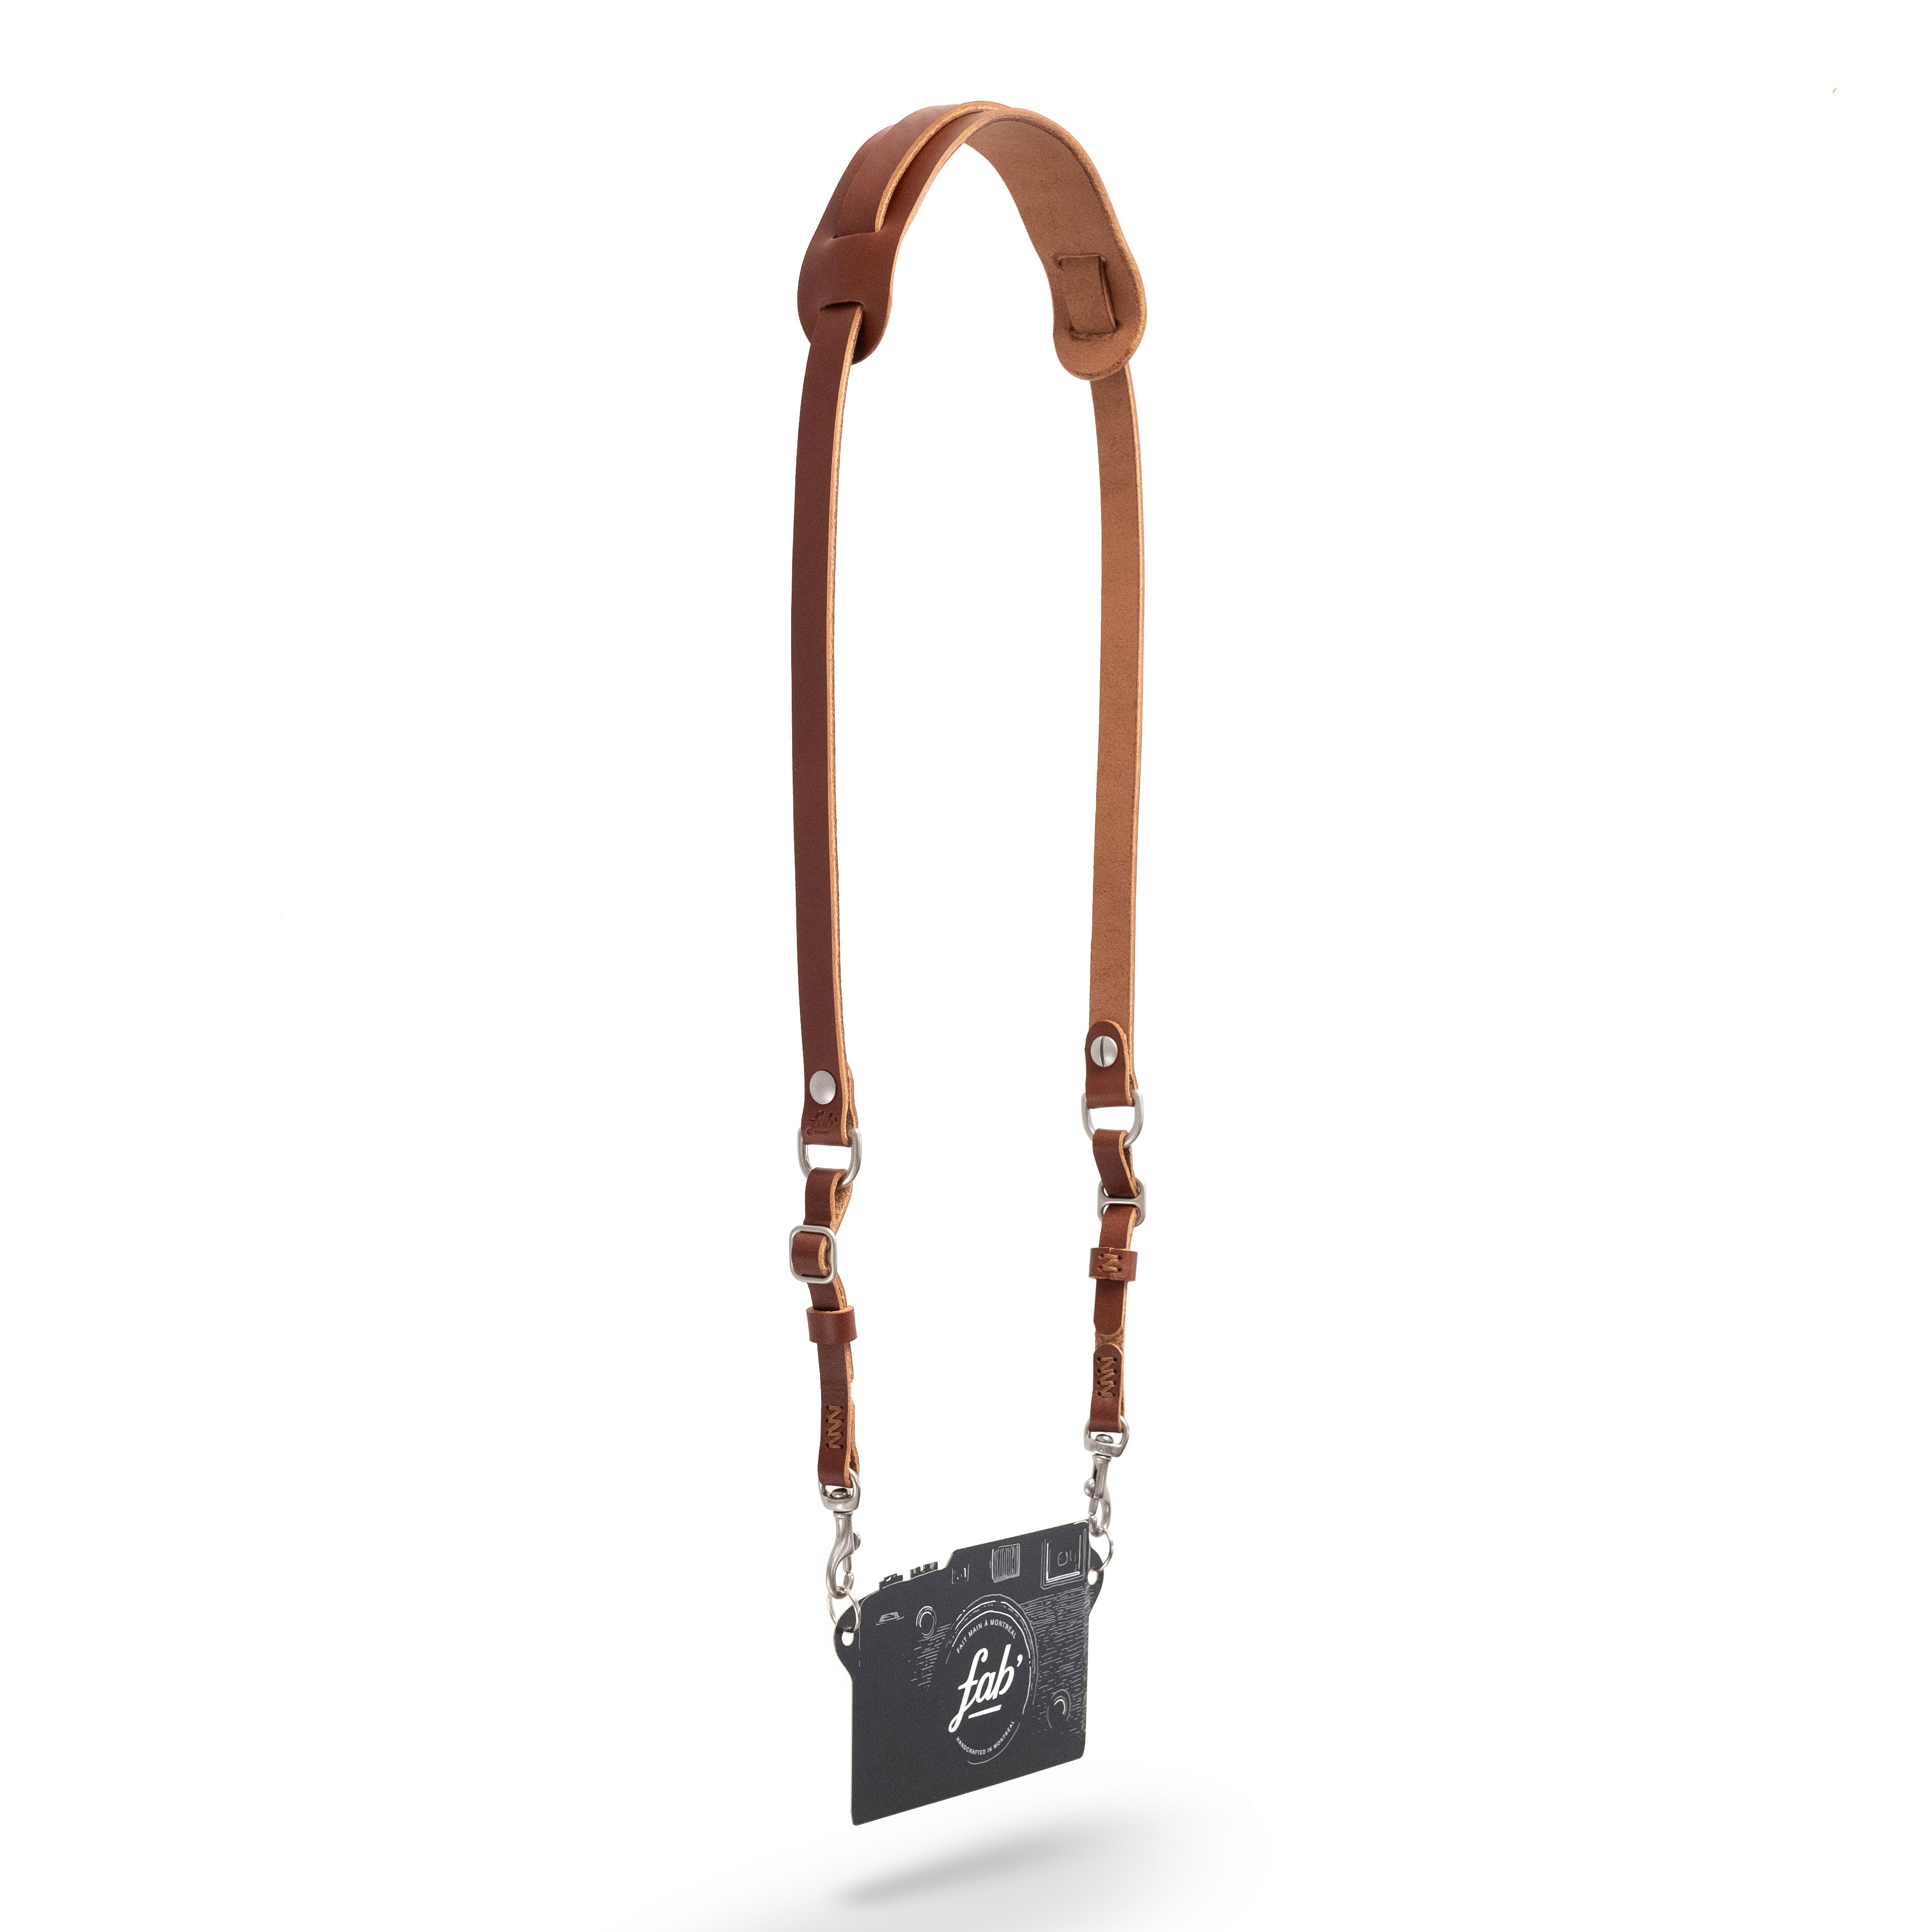 Fab' F11 strap - Brown leather - Size XL (55")